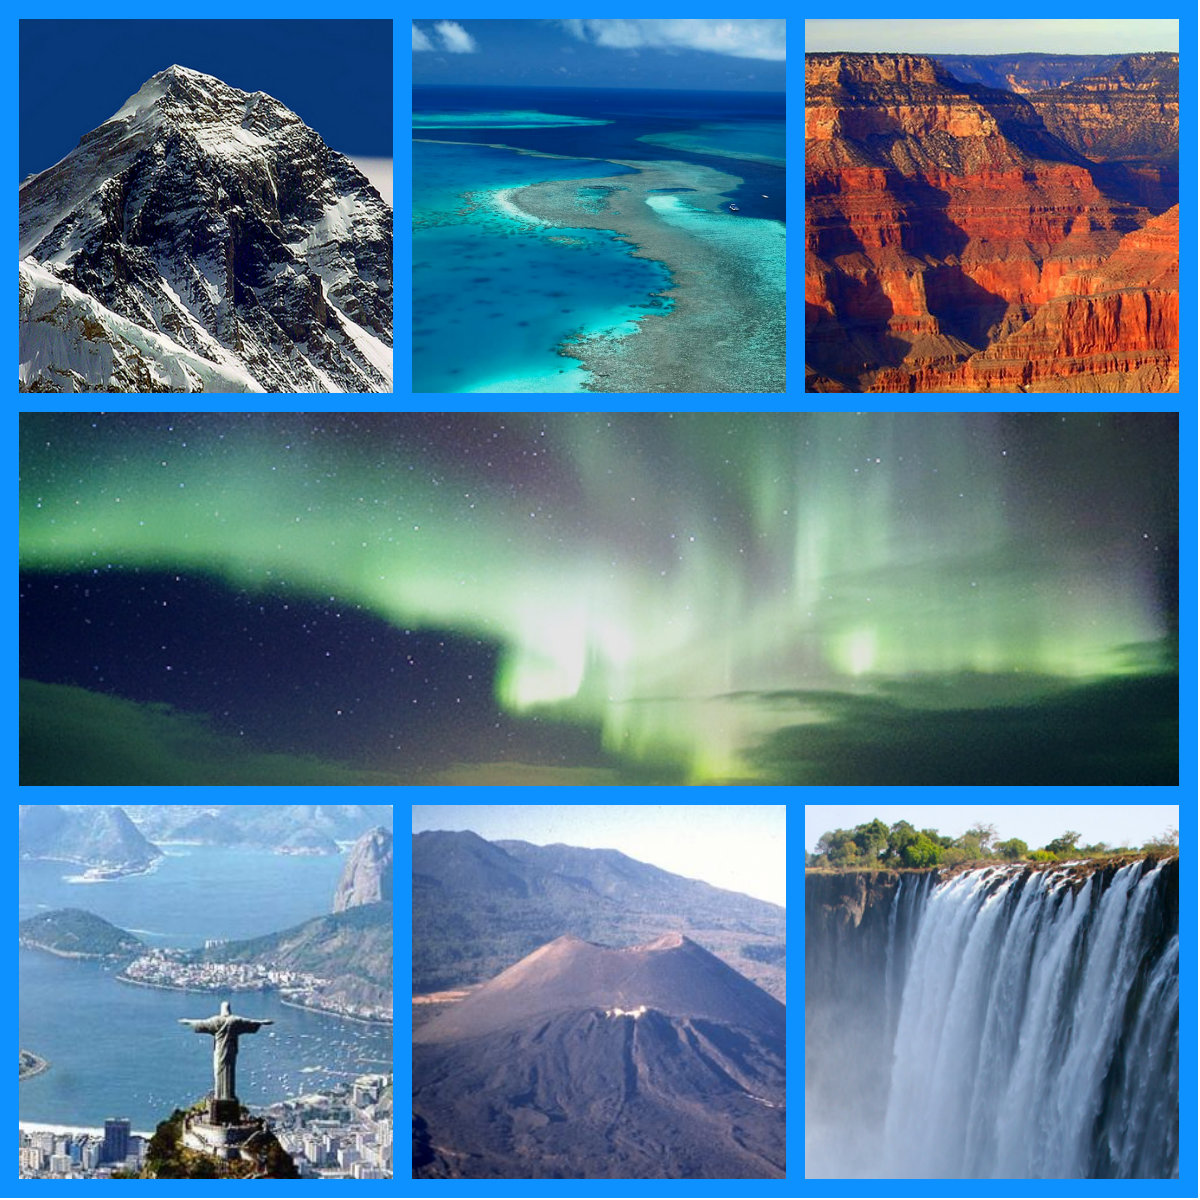 7 Wonders of the Natural World on emaze